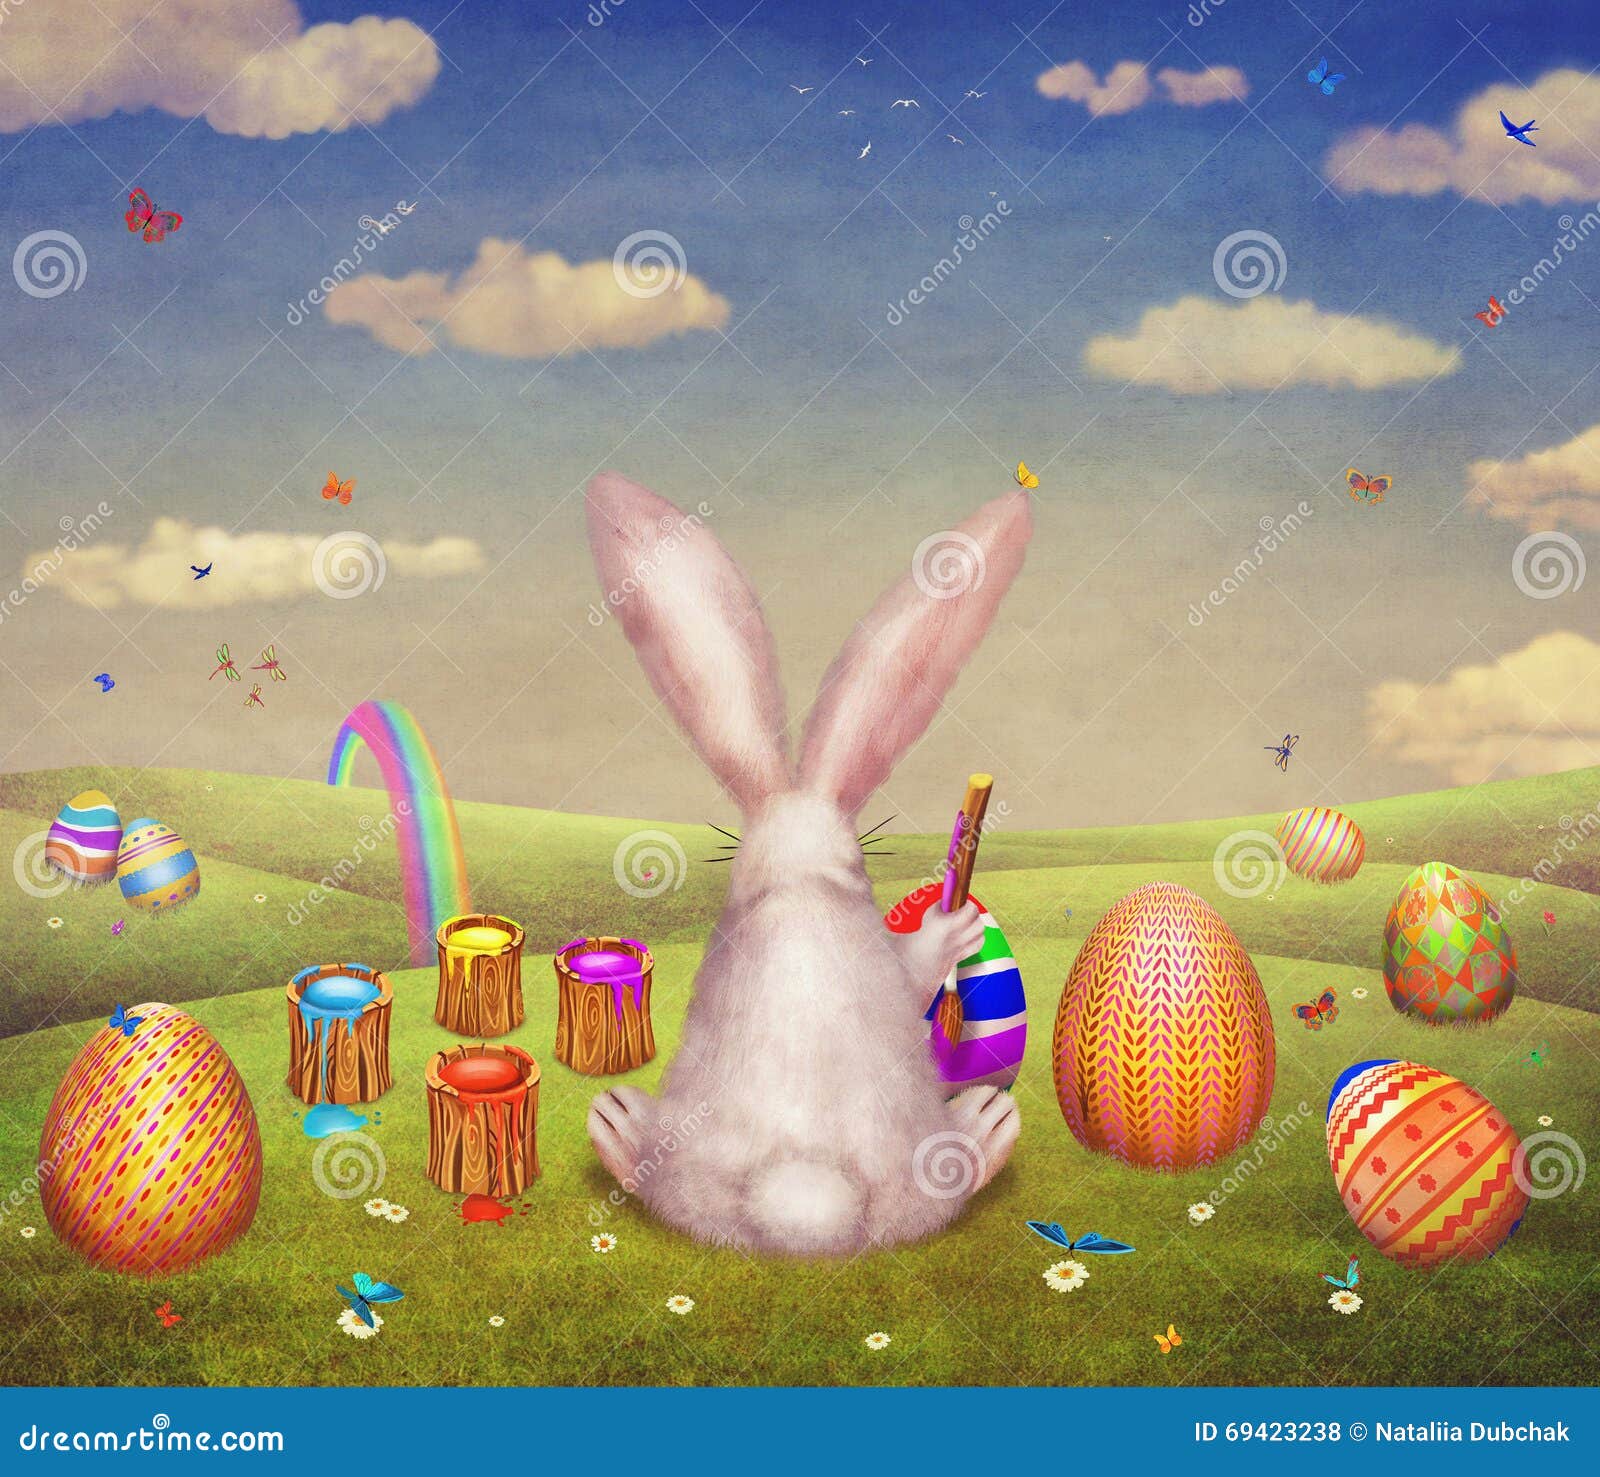 A Cute Bunny Painting of Egg for Easter on a Hill Surrounded by Easter Eggs Stock Illustration - Illustration of funny, mood: 69423238